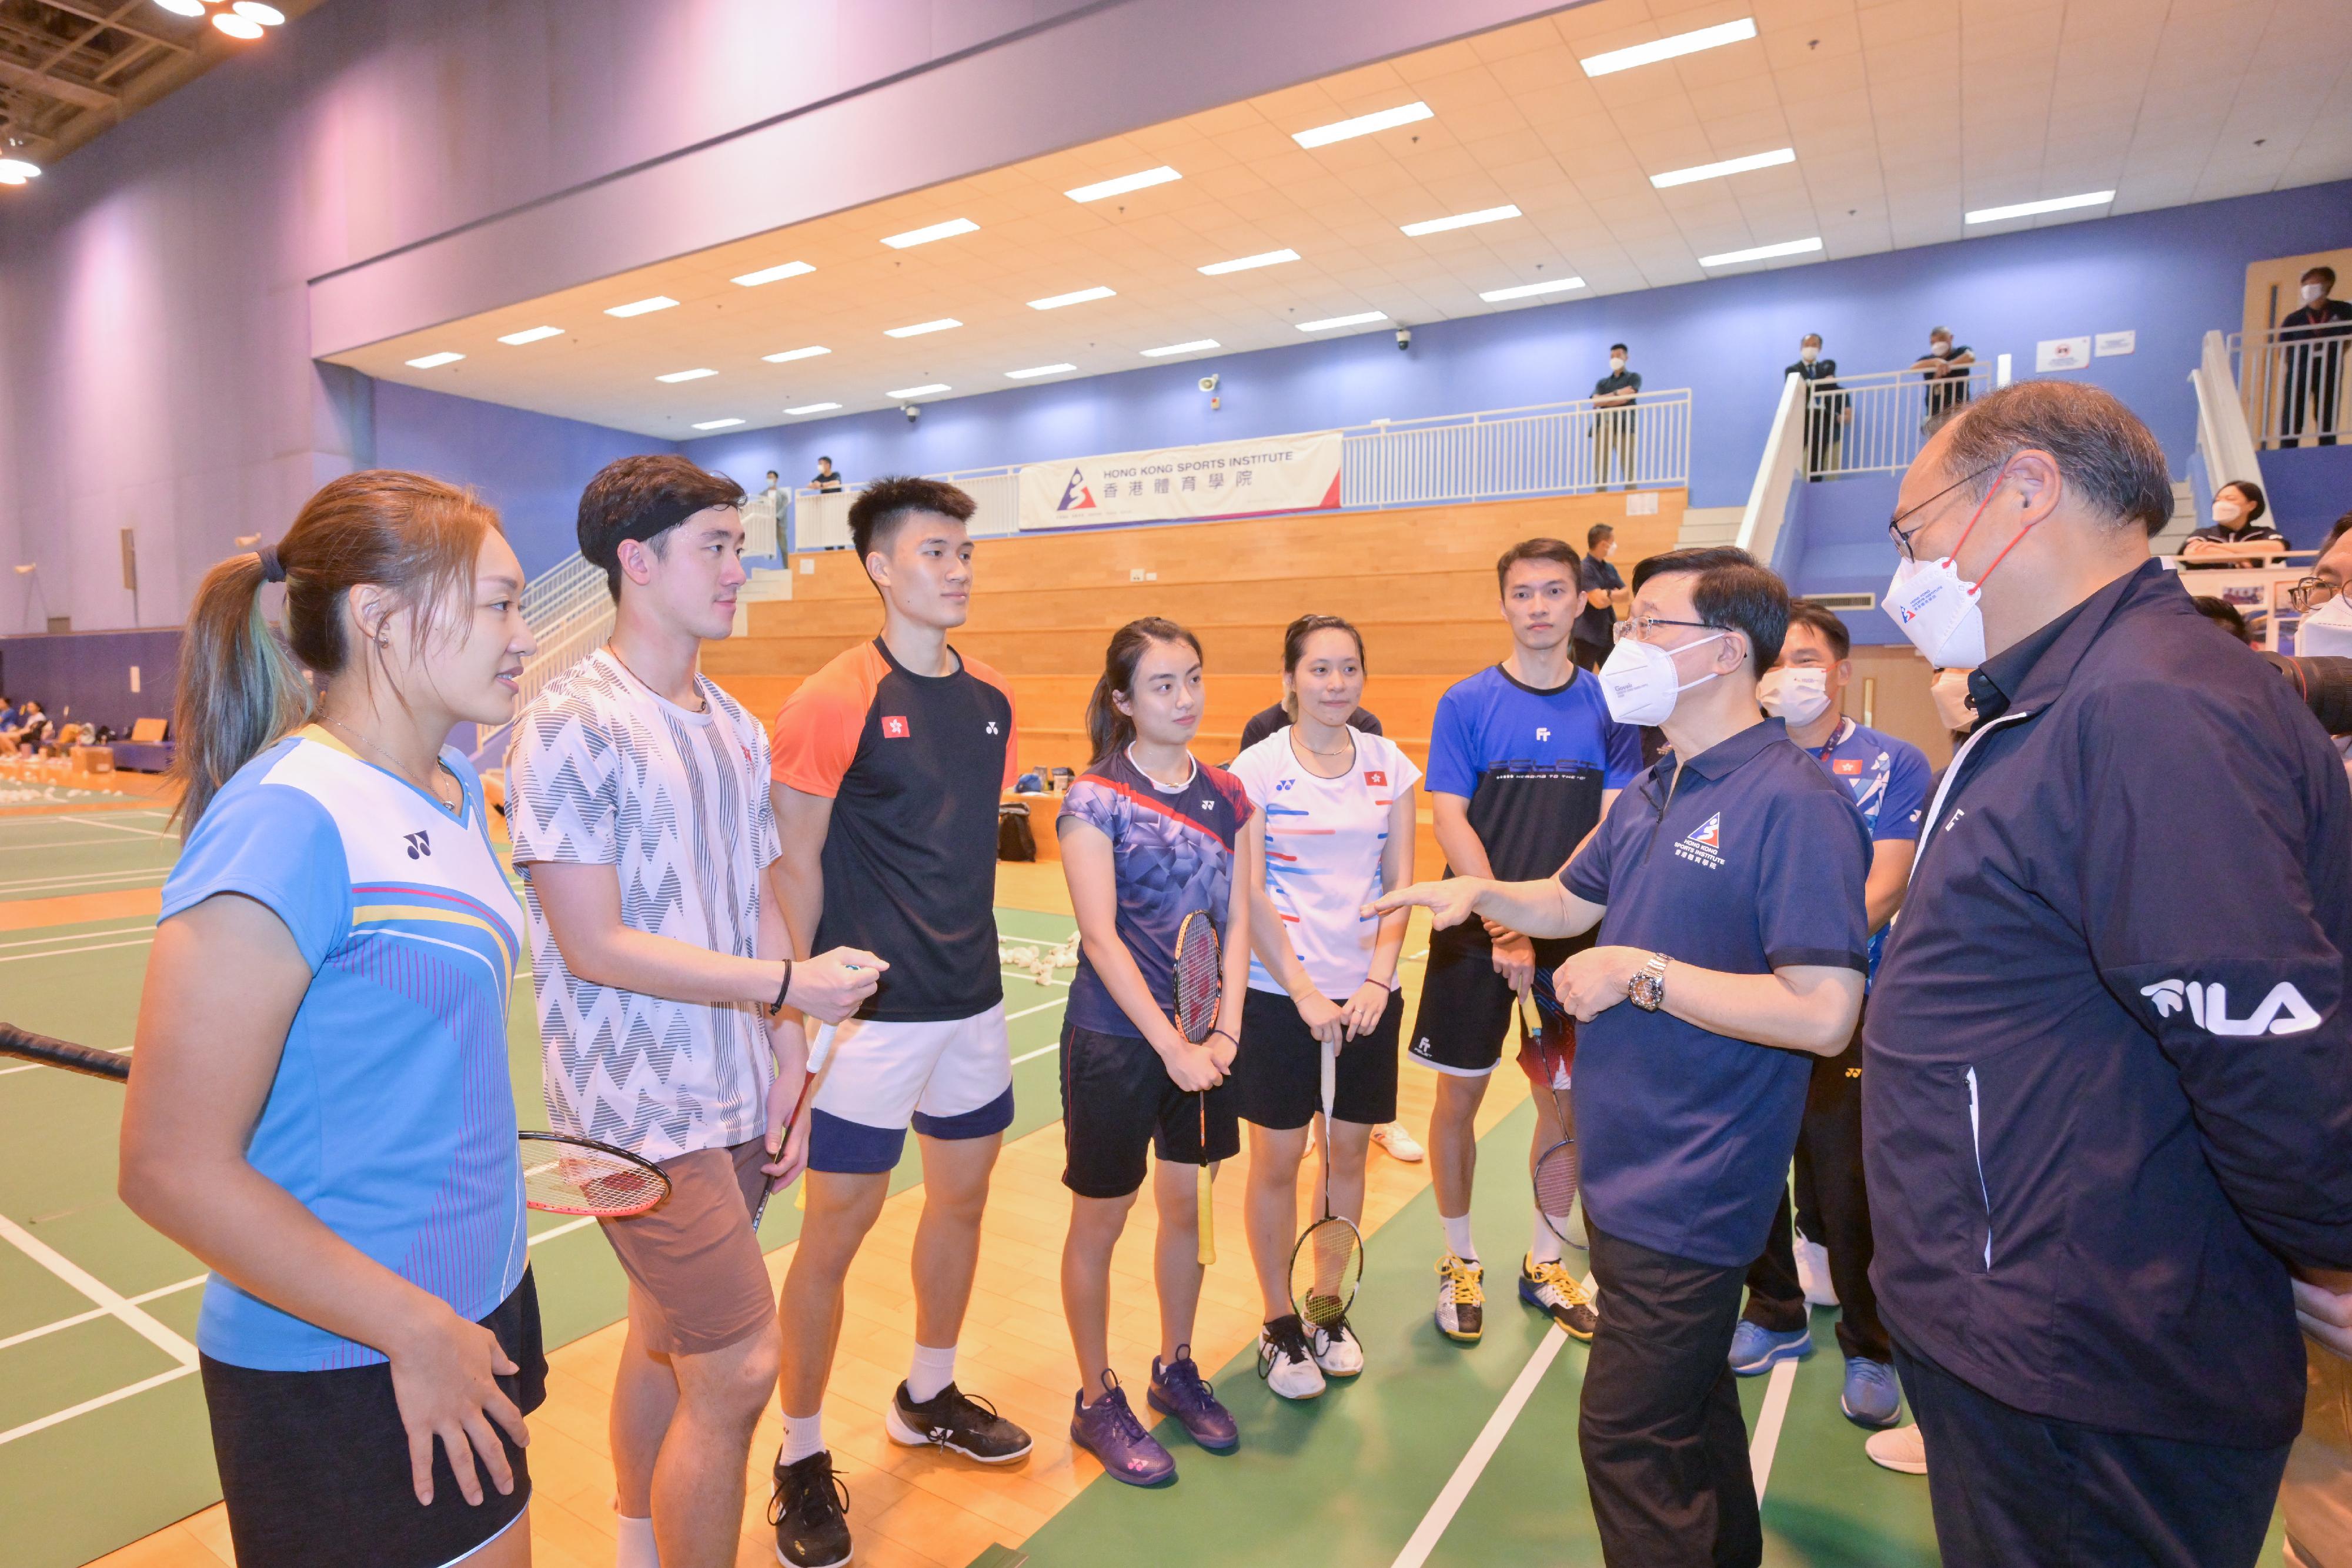 The Chief Executive, Mr John Lee, today (August 16) visited the Hong Kong Sports Institute (HKSI). Photo shows Mr Lee (second right) chatting with badminton athletes. Looking on is the Chairman of the Board of Directors of the HKSI, Dr Lam Tai-fai (first right).